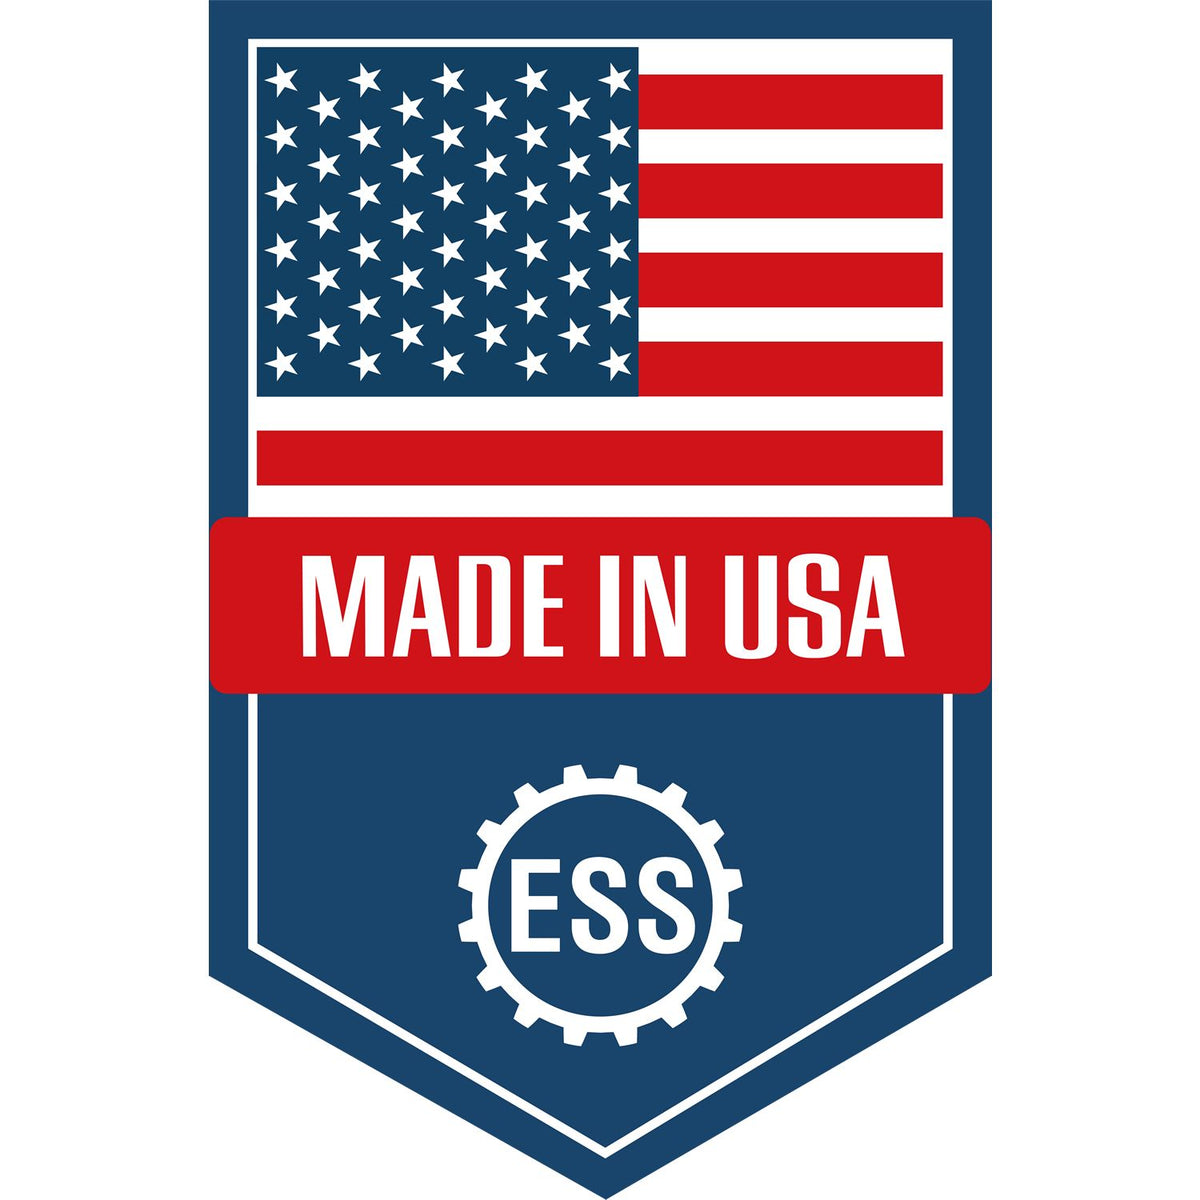 An icon or graphic with an american flag and text reading Made in USA for the Soft North Dakota Professional Engineer Seal